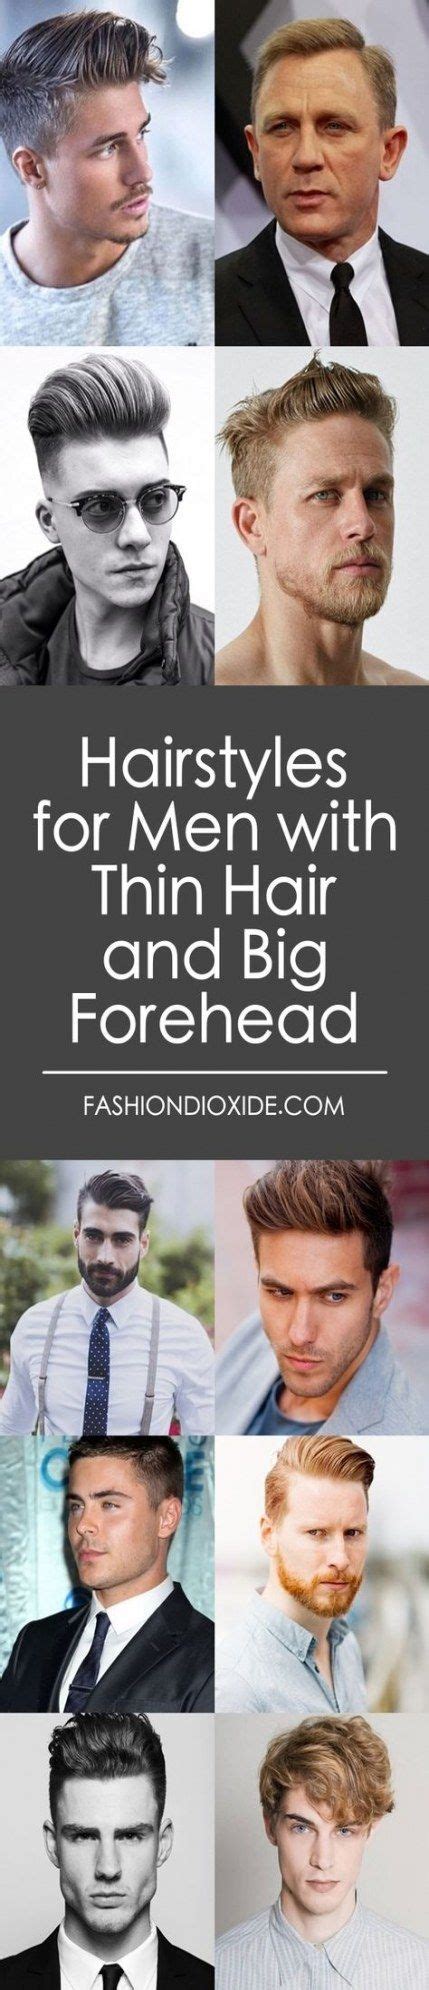 Mens hairstyles big head #menshairstyles | mens hairstyles image source : 38+ Super ideas hair styles for men with big foreheads ...